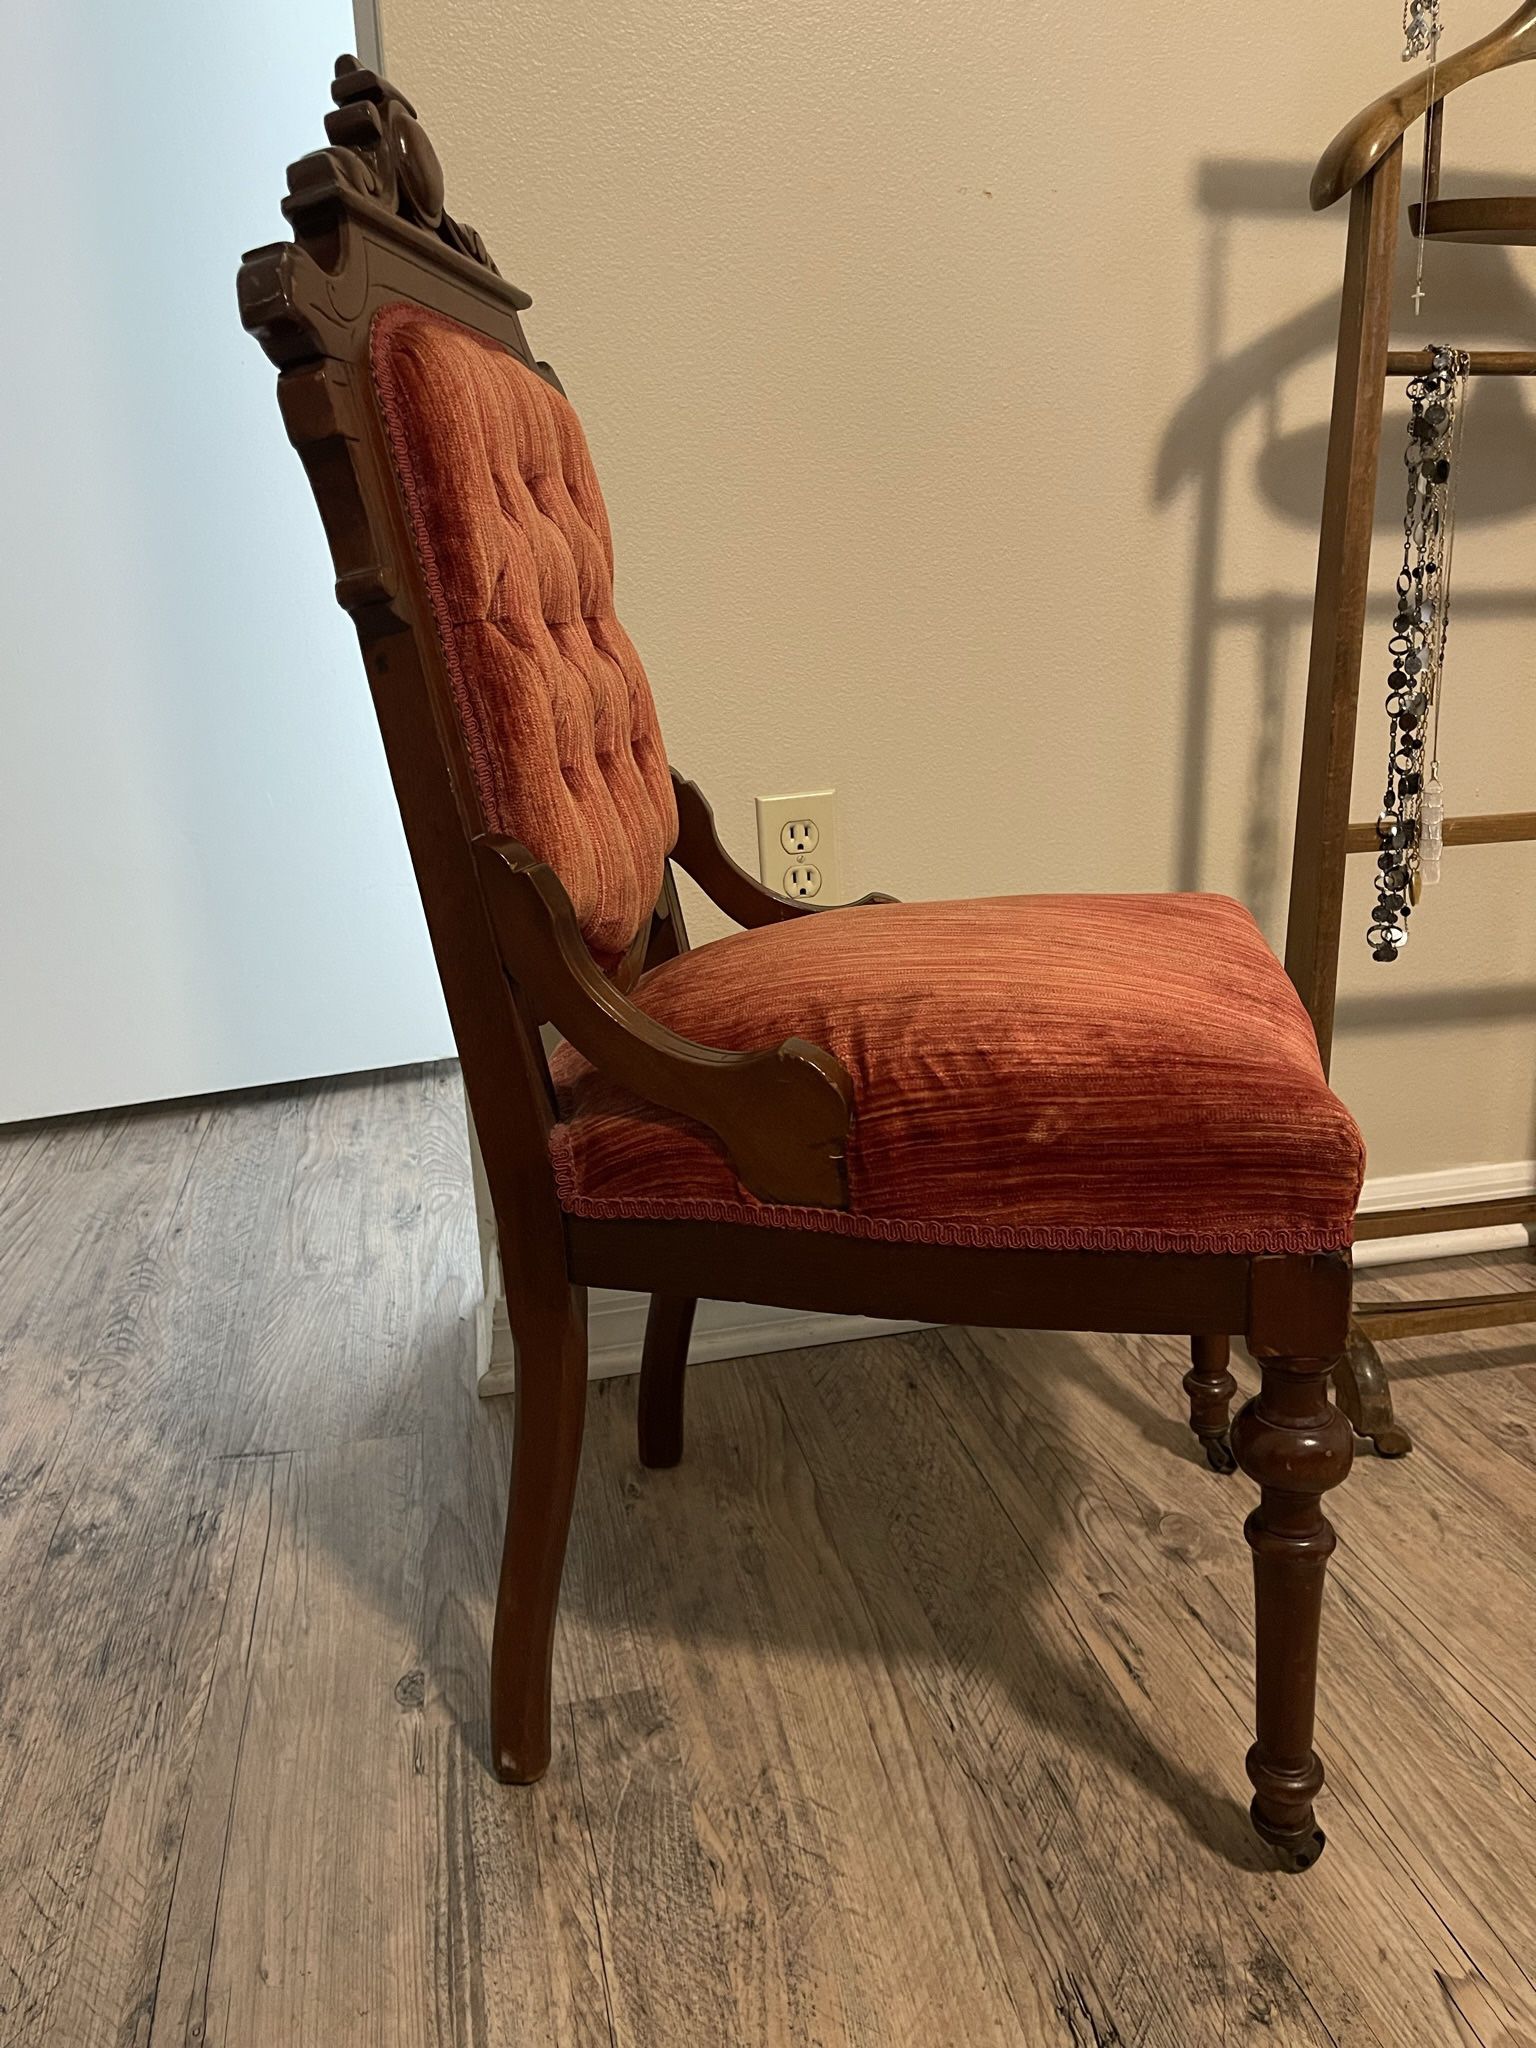 Vintage Parlor Chair, 75% Off